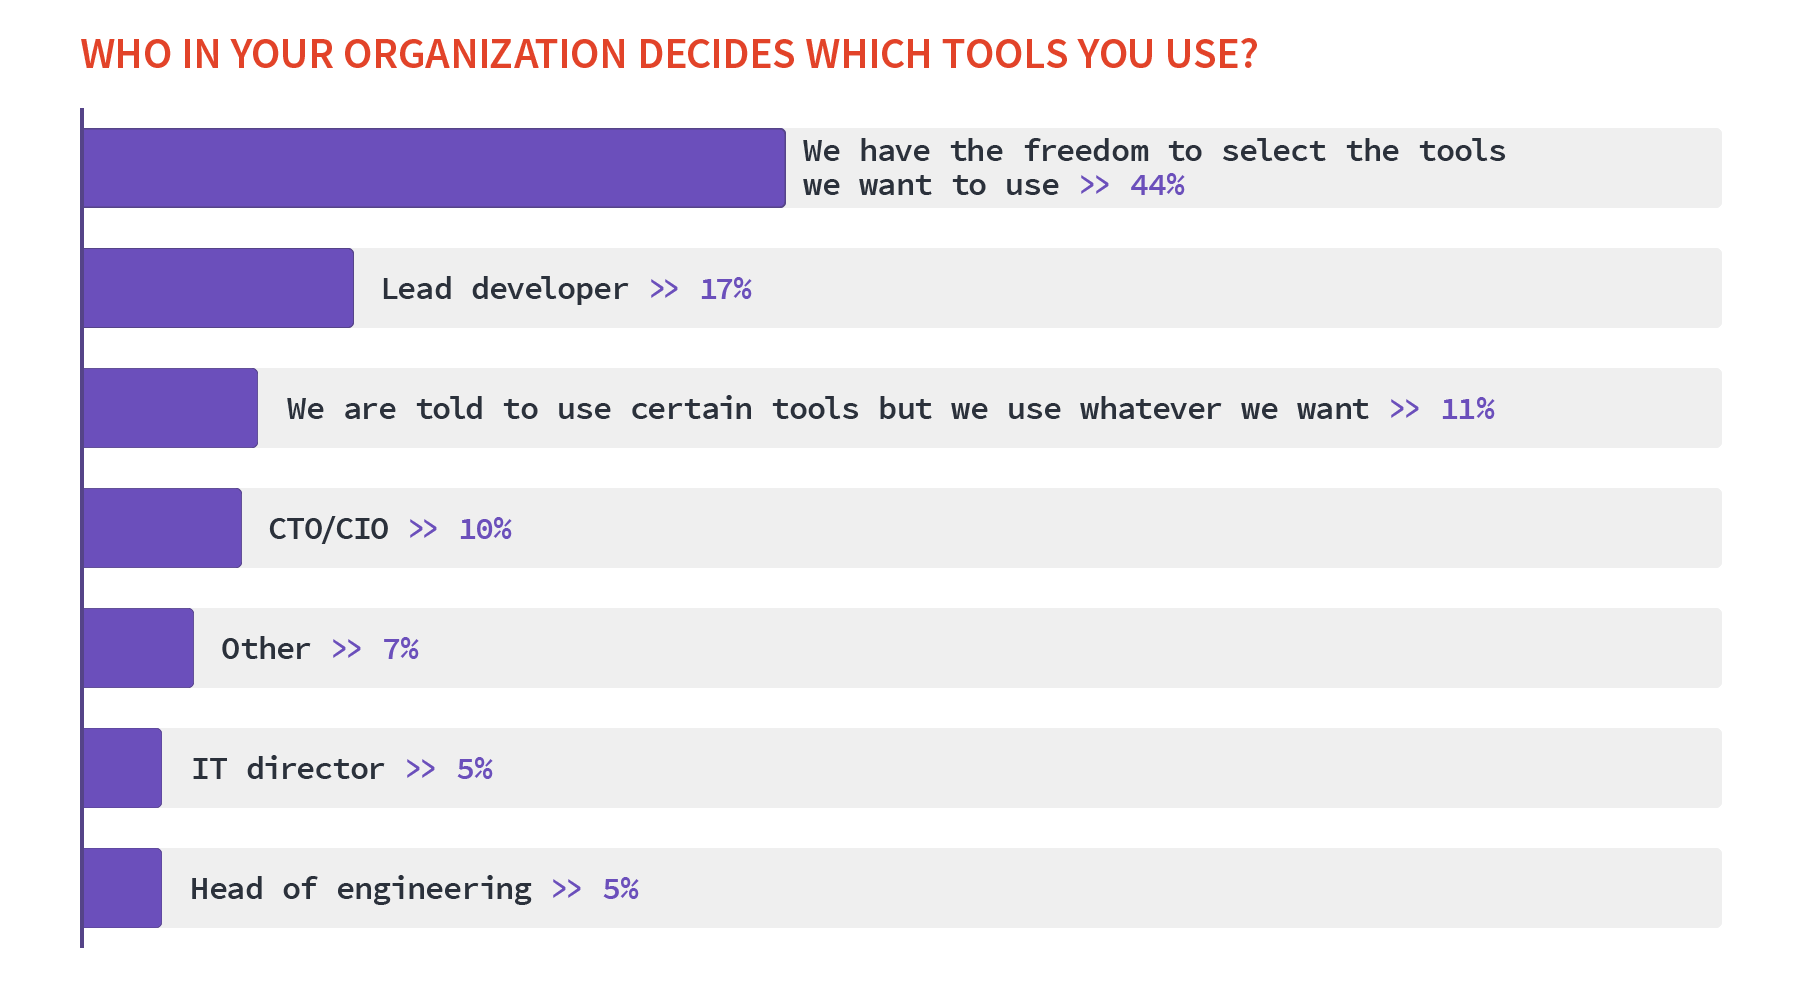 Who decides which tools are used